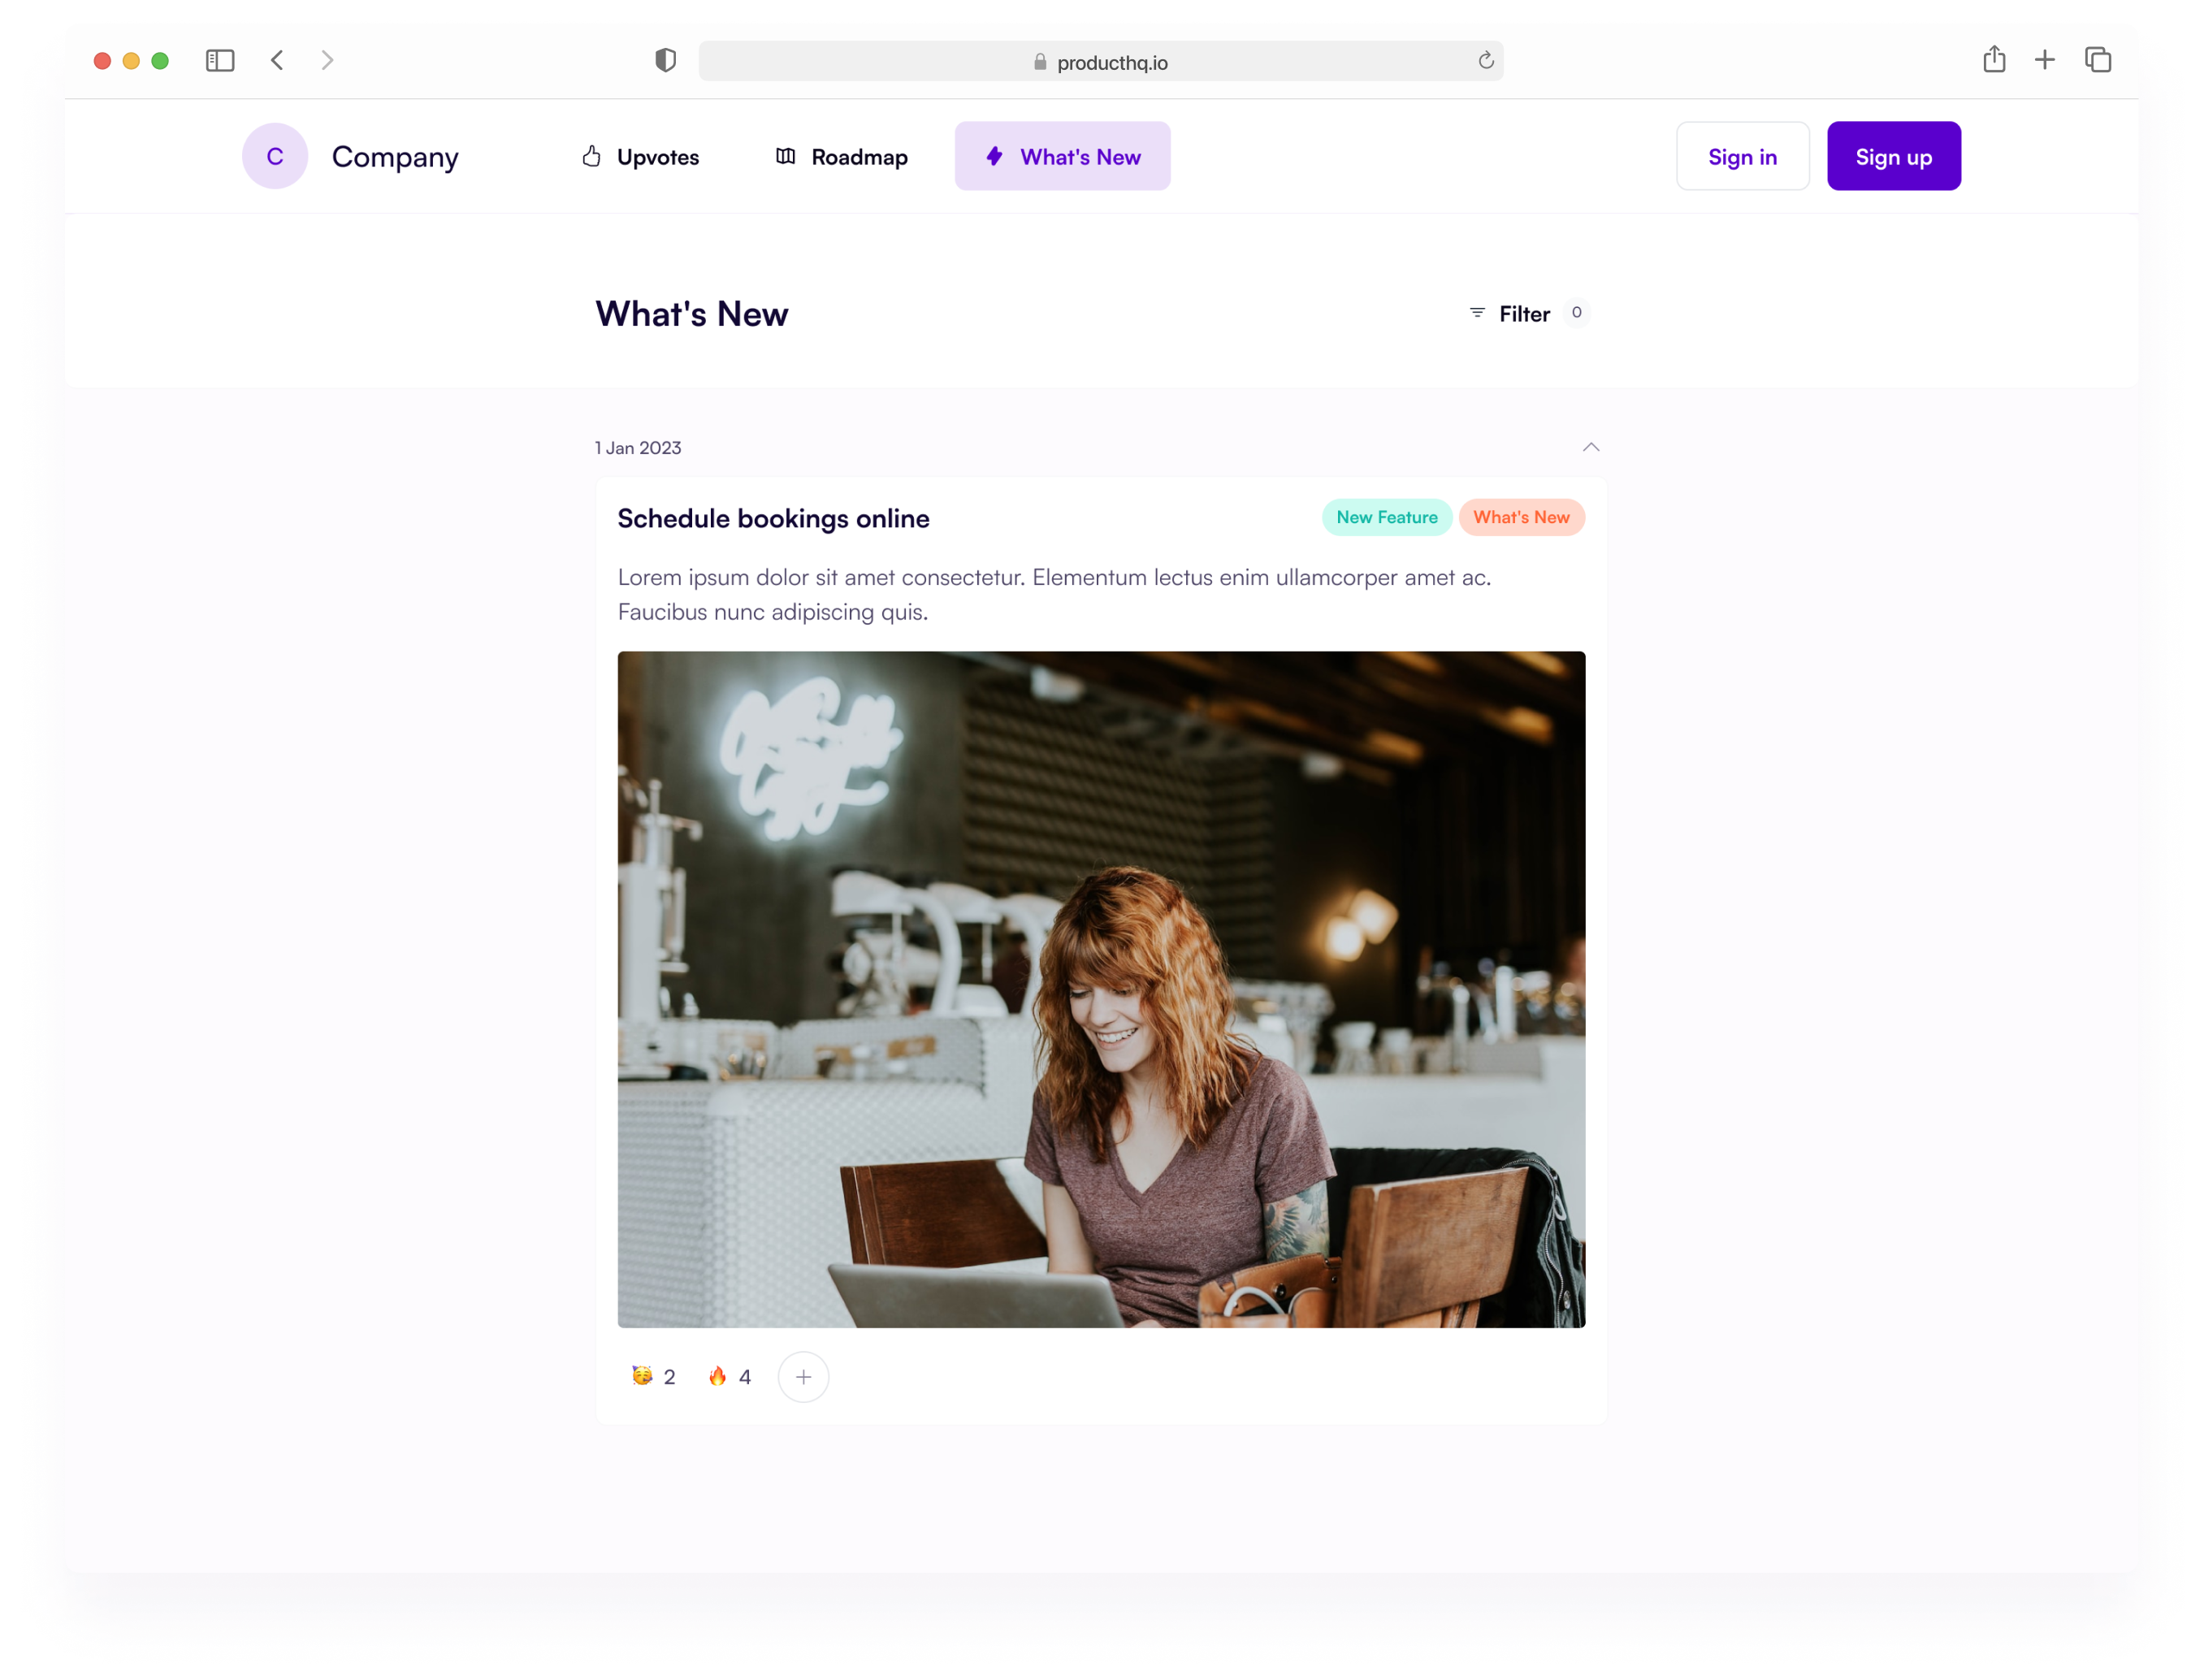 The What's New feature allows you to write a post about new products, features, bugs, and share that with your customers and socials. It helps keep users informed and engaged. 